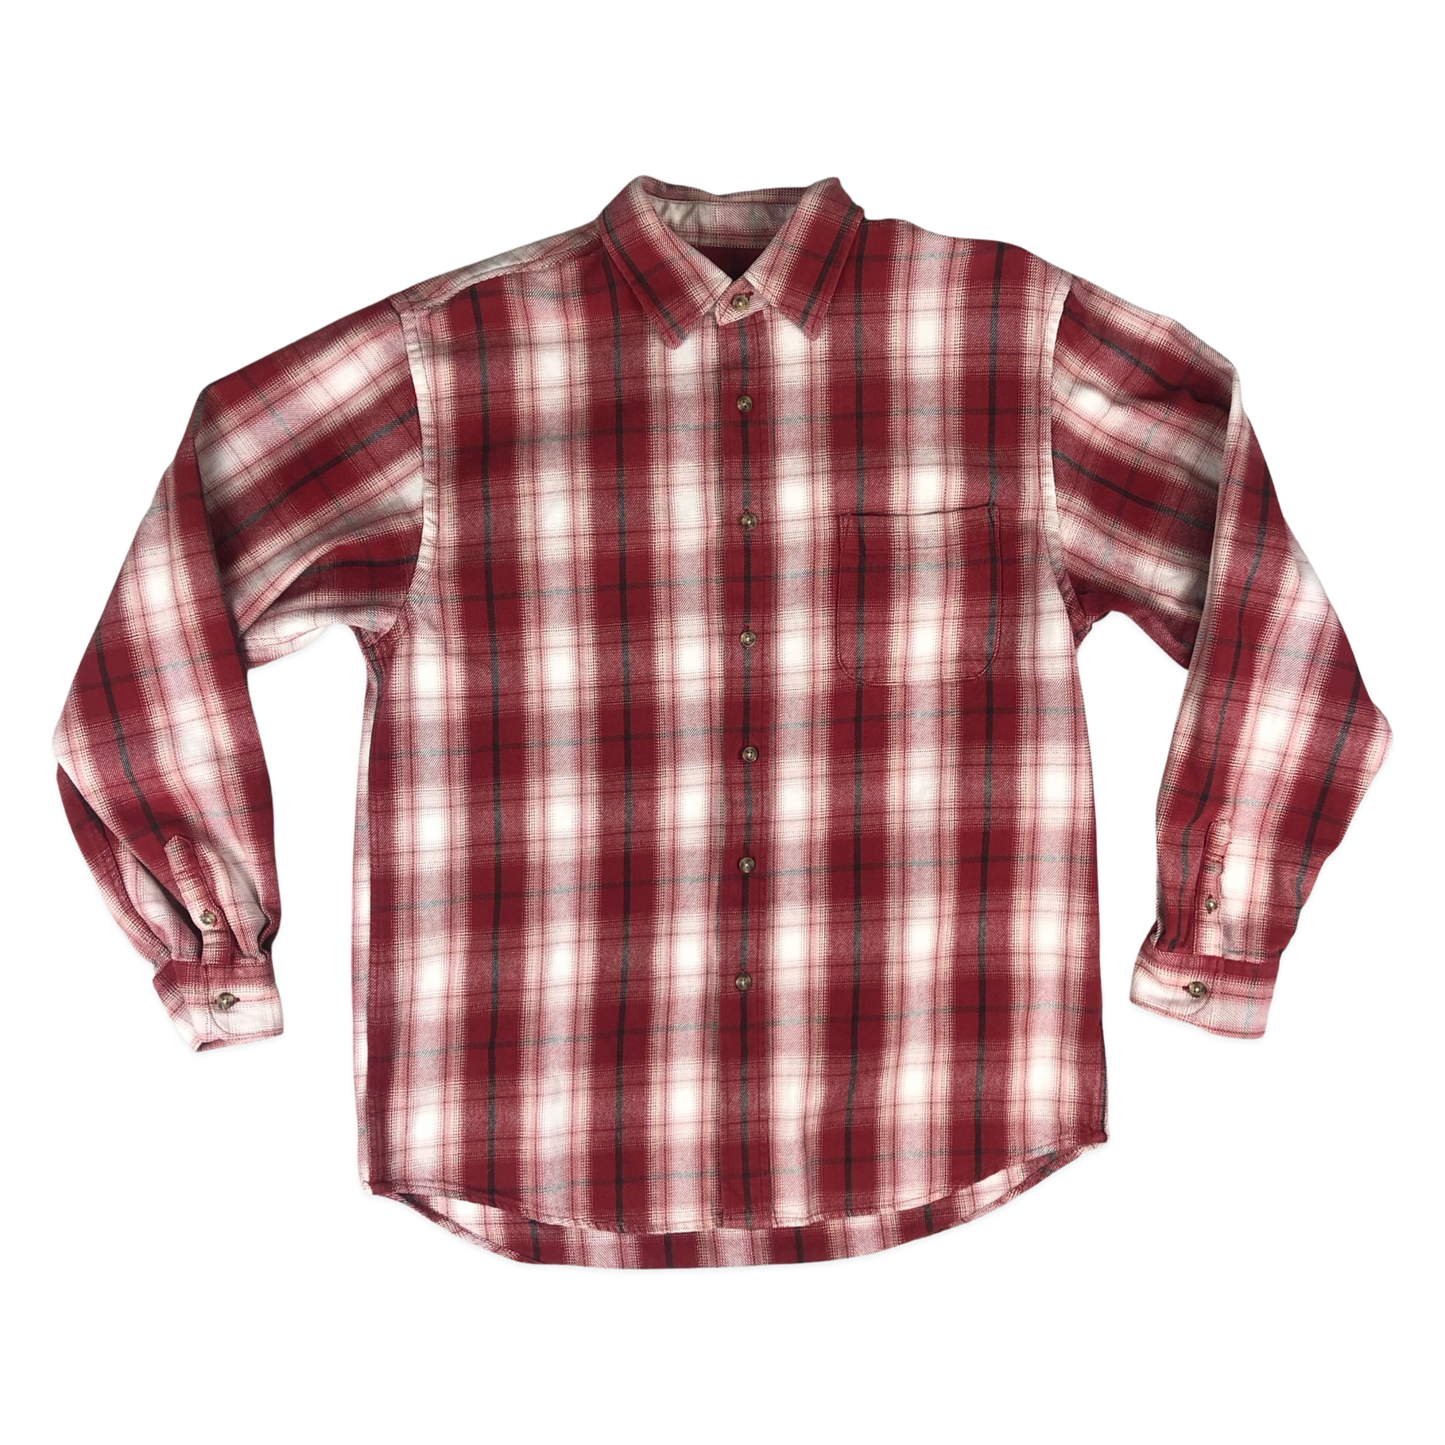 Vintage Red and White Heavy Plaid Flannel Shirt M